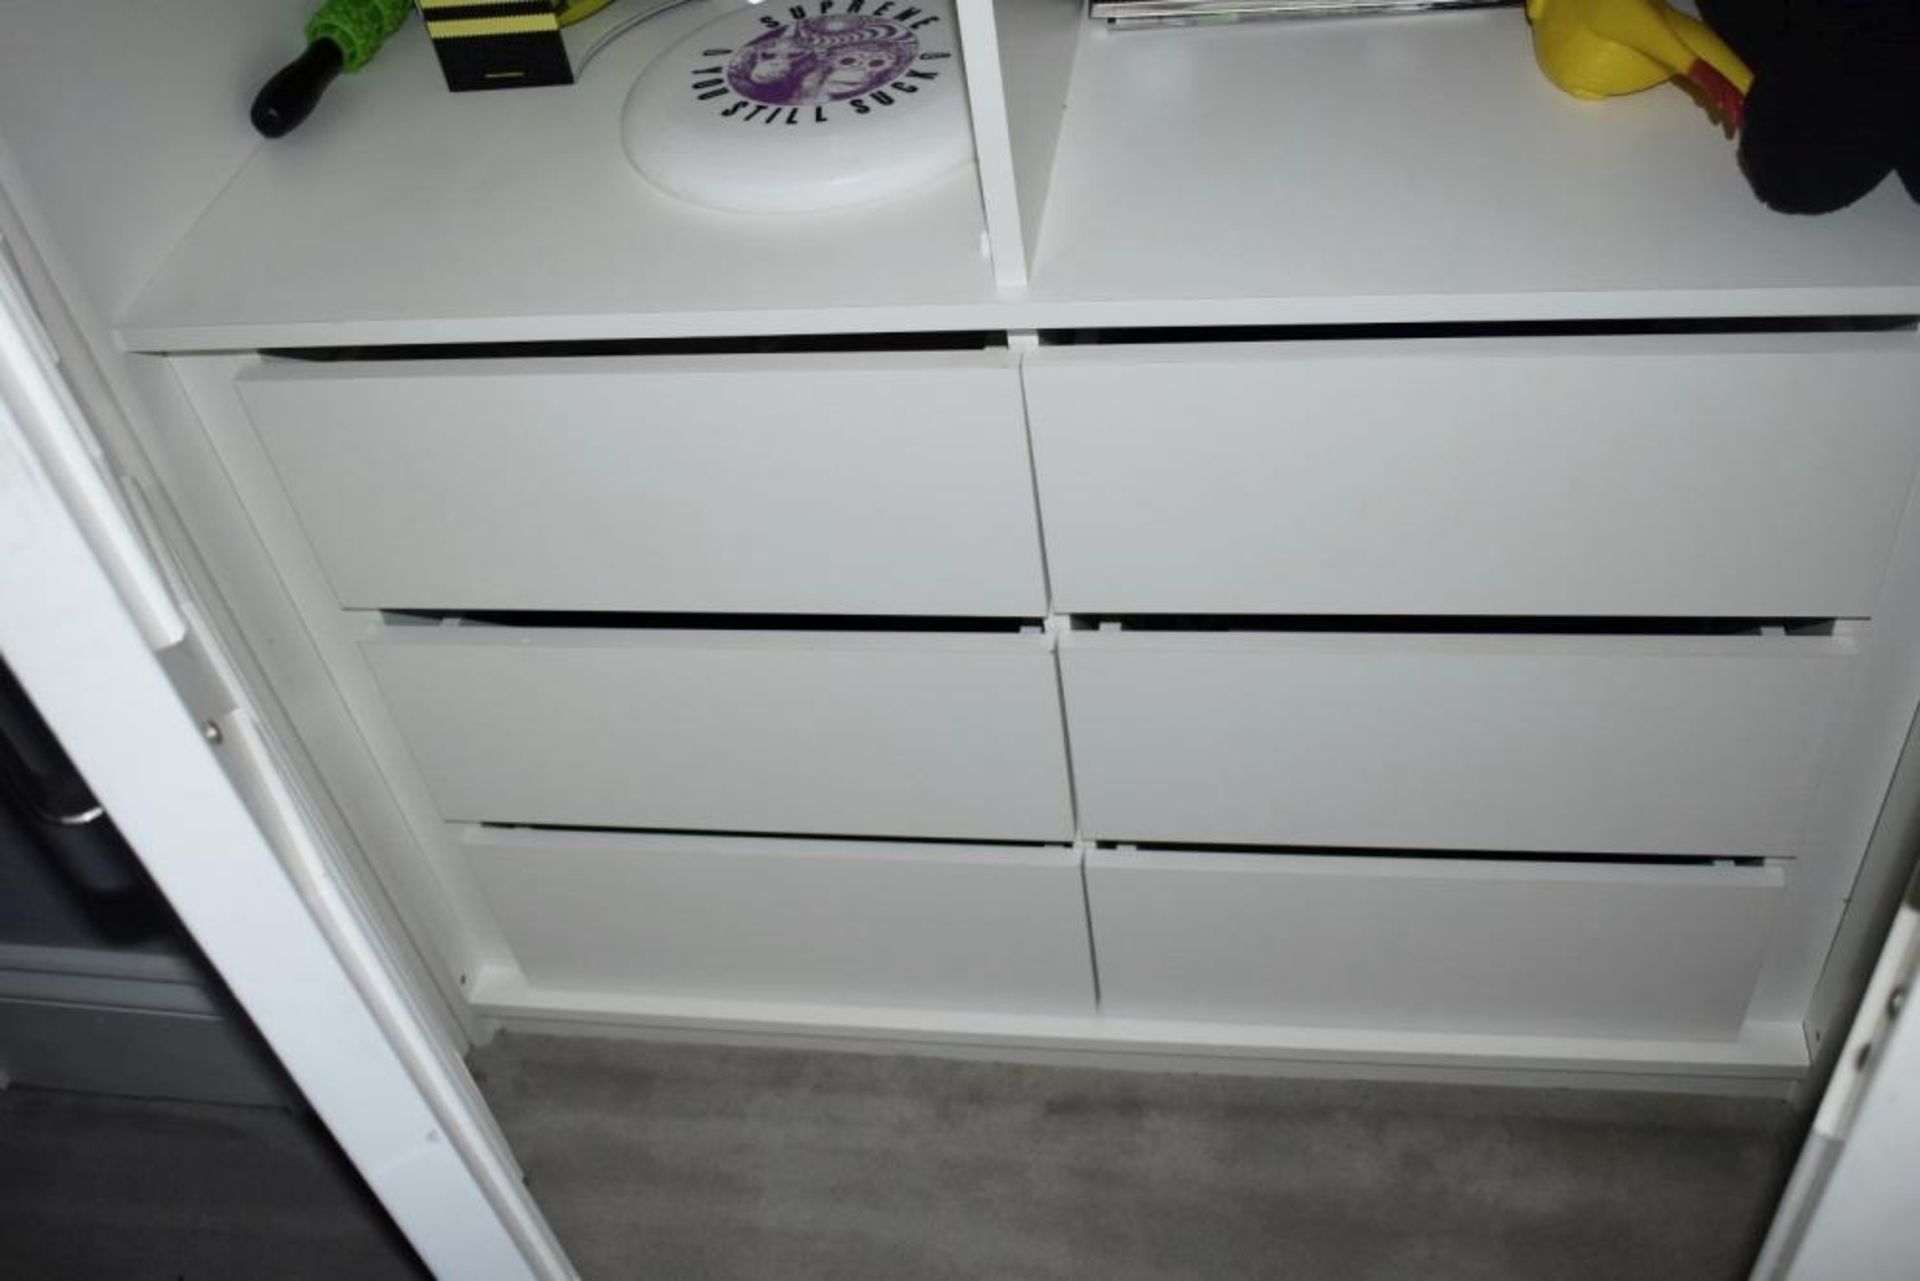 2 x Built-in Double Door Waredrobes In White - Approx Dimensions Of Each: W120 x H197 x D57cm - Ref: - Image 5 of 5